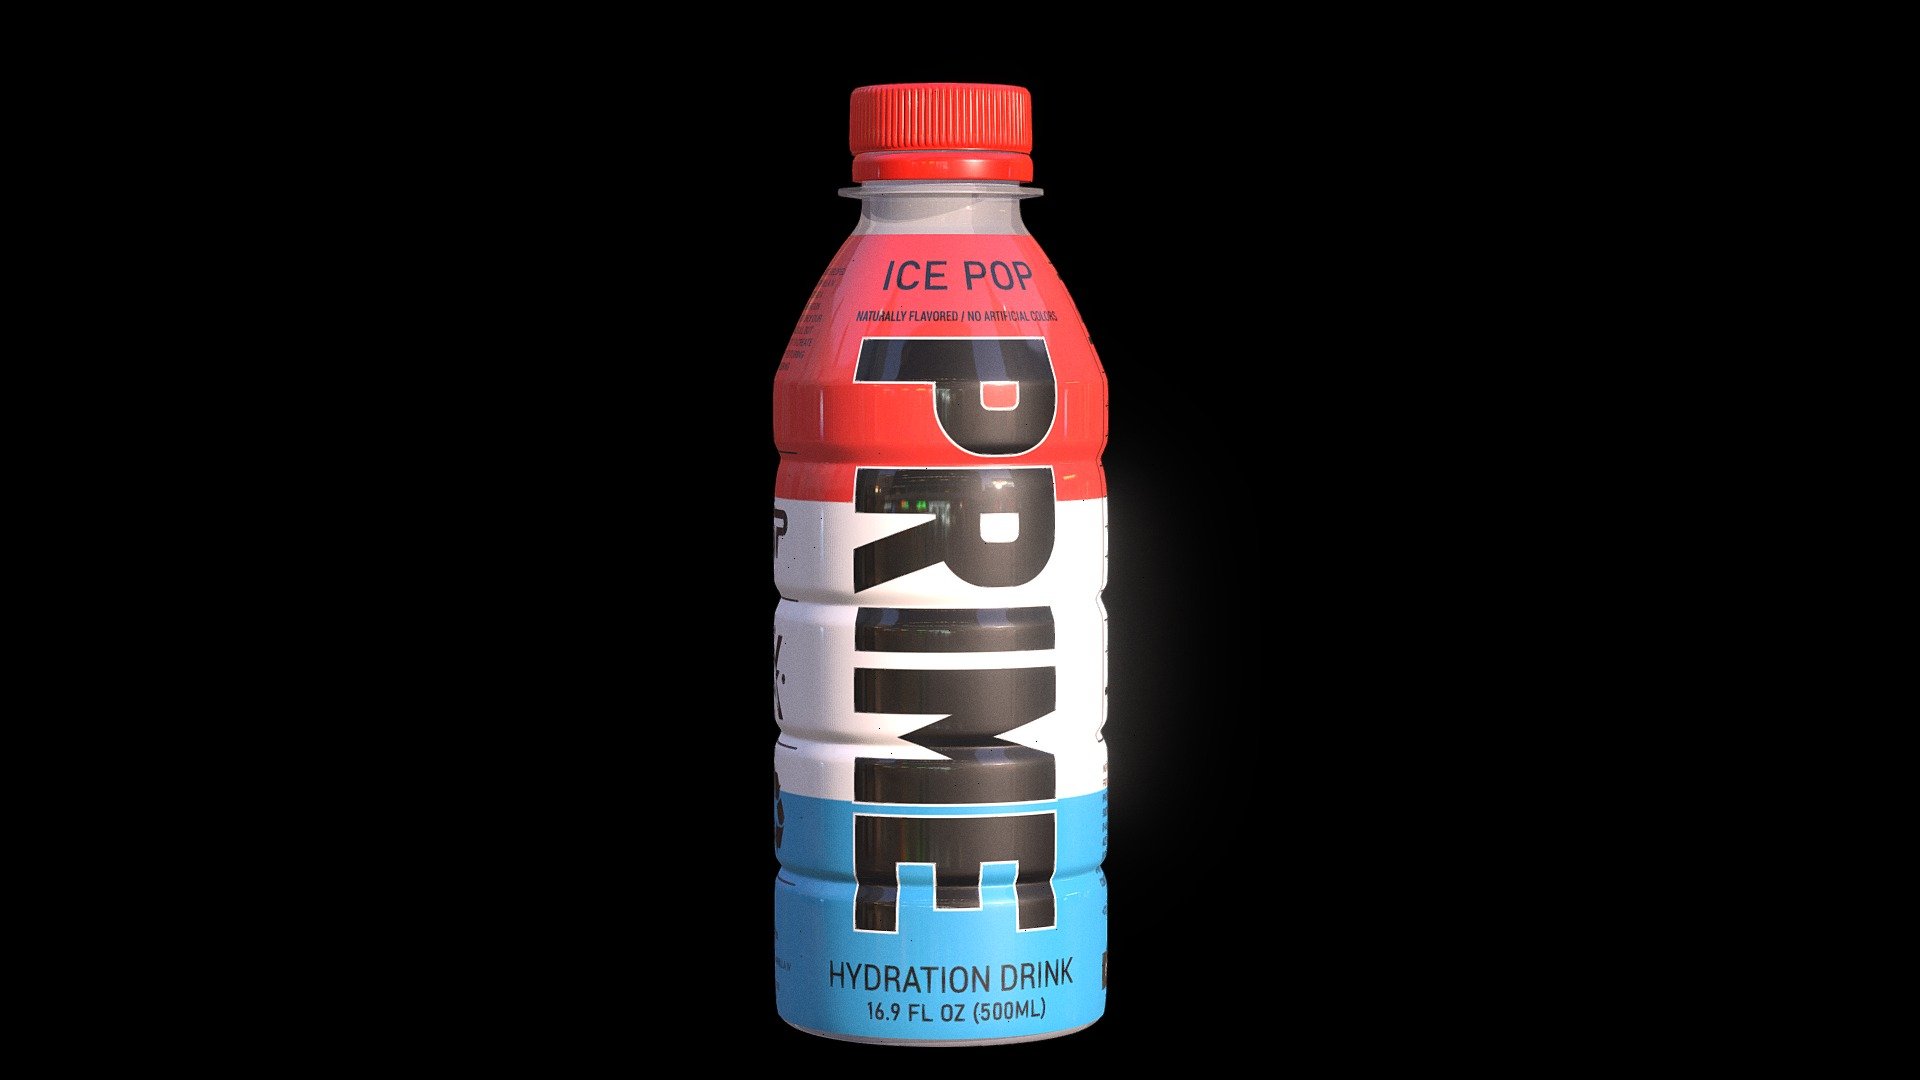 This 3d model is based on KSI and Logan Paul's beverage called Prime Hydration
this one is the Ice pop flavor.

this model is available for sale so feel free to send me a message or email me at
parrillachino27@gmail.com

Model was designed and created by me using blender
and textures and rendered were done by xerxes 3d.

Artists:
   - Guillermo Parrilla IV
   - Xerxes3D - Prime Hydration Ice Pop - 3D model by Chino Parrilla (@parrillachino27) 3d model